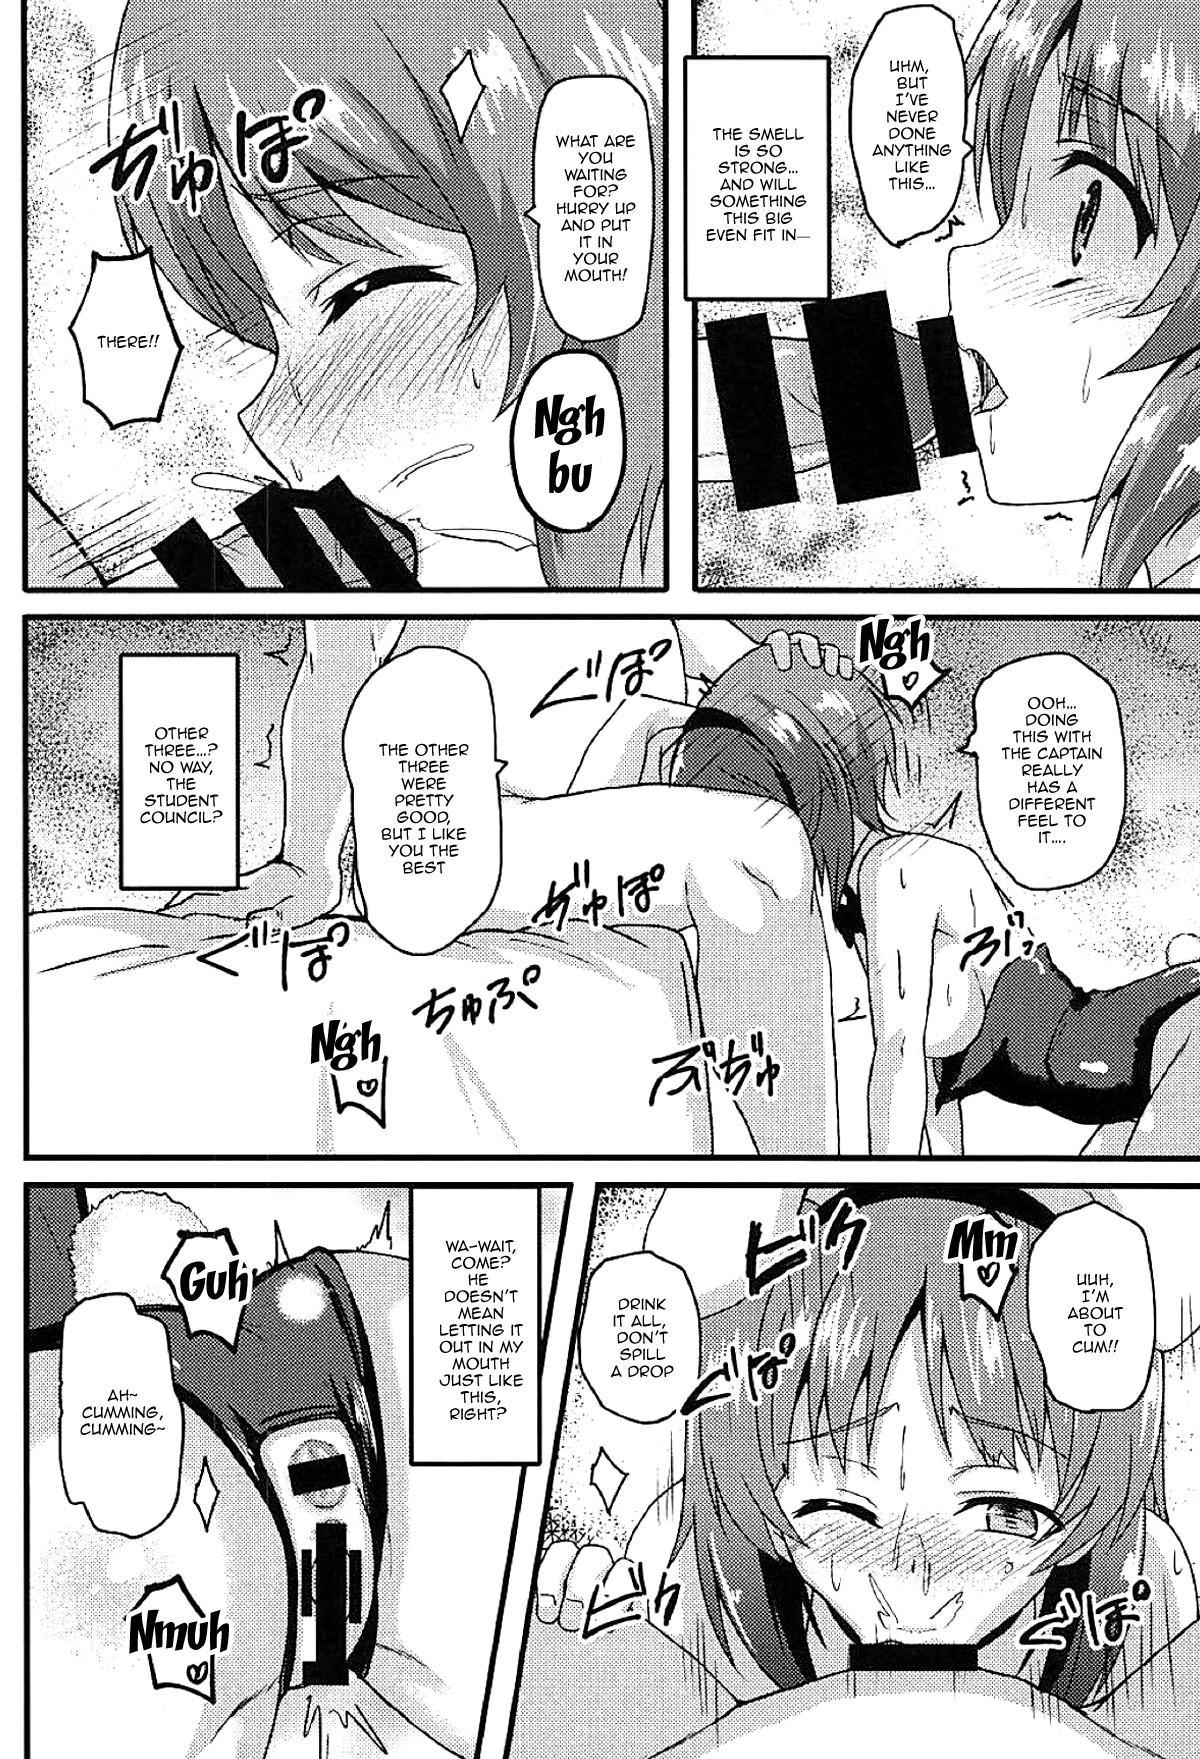 Role Play Mihosya Shiyou!! | Let's Do It Mihosya!! - Girls und panzer Large - Page 9